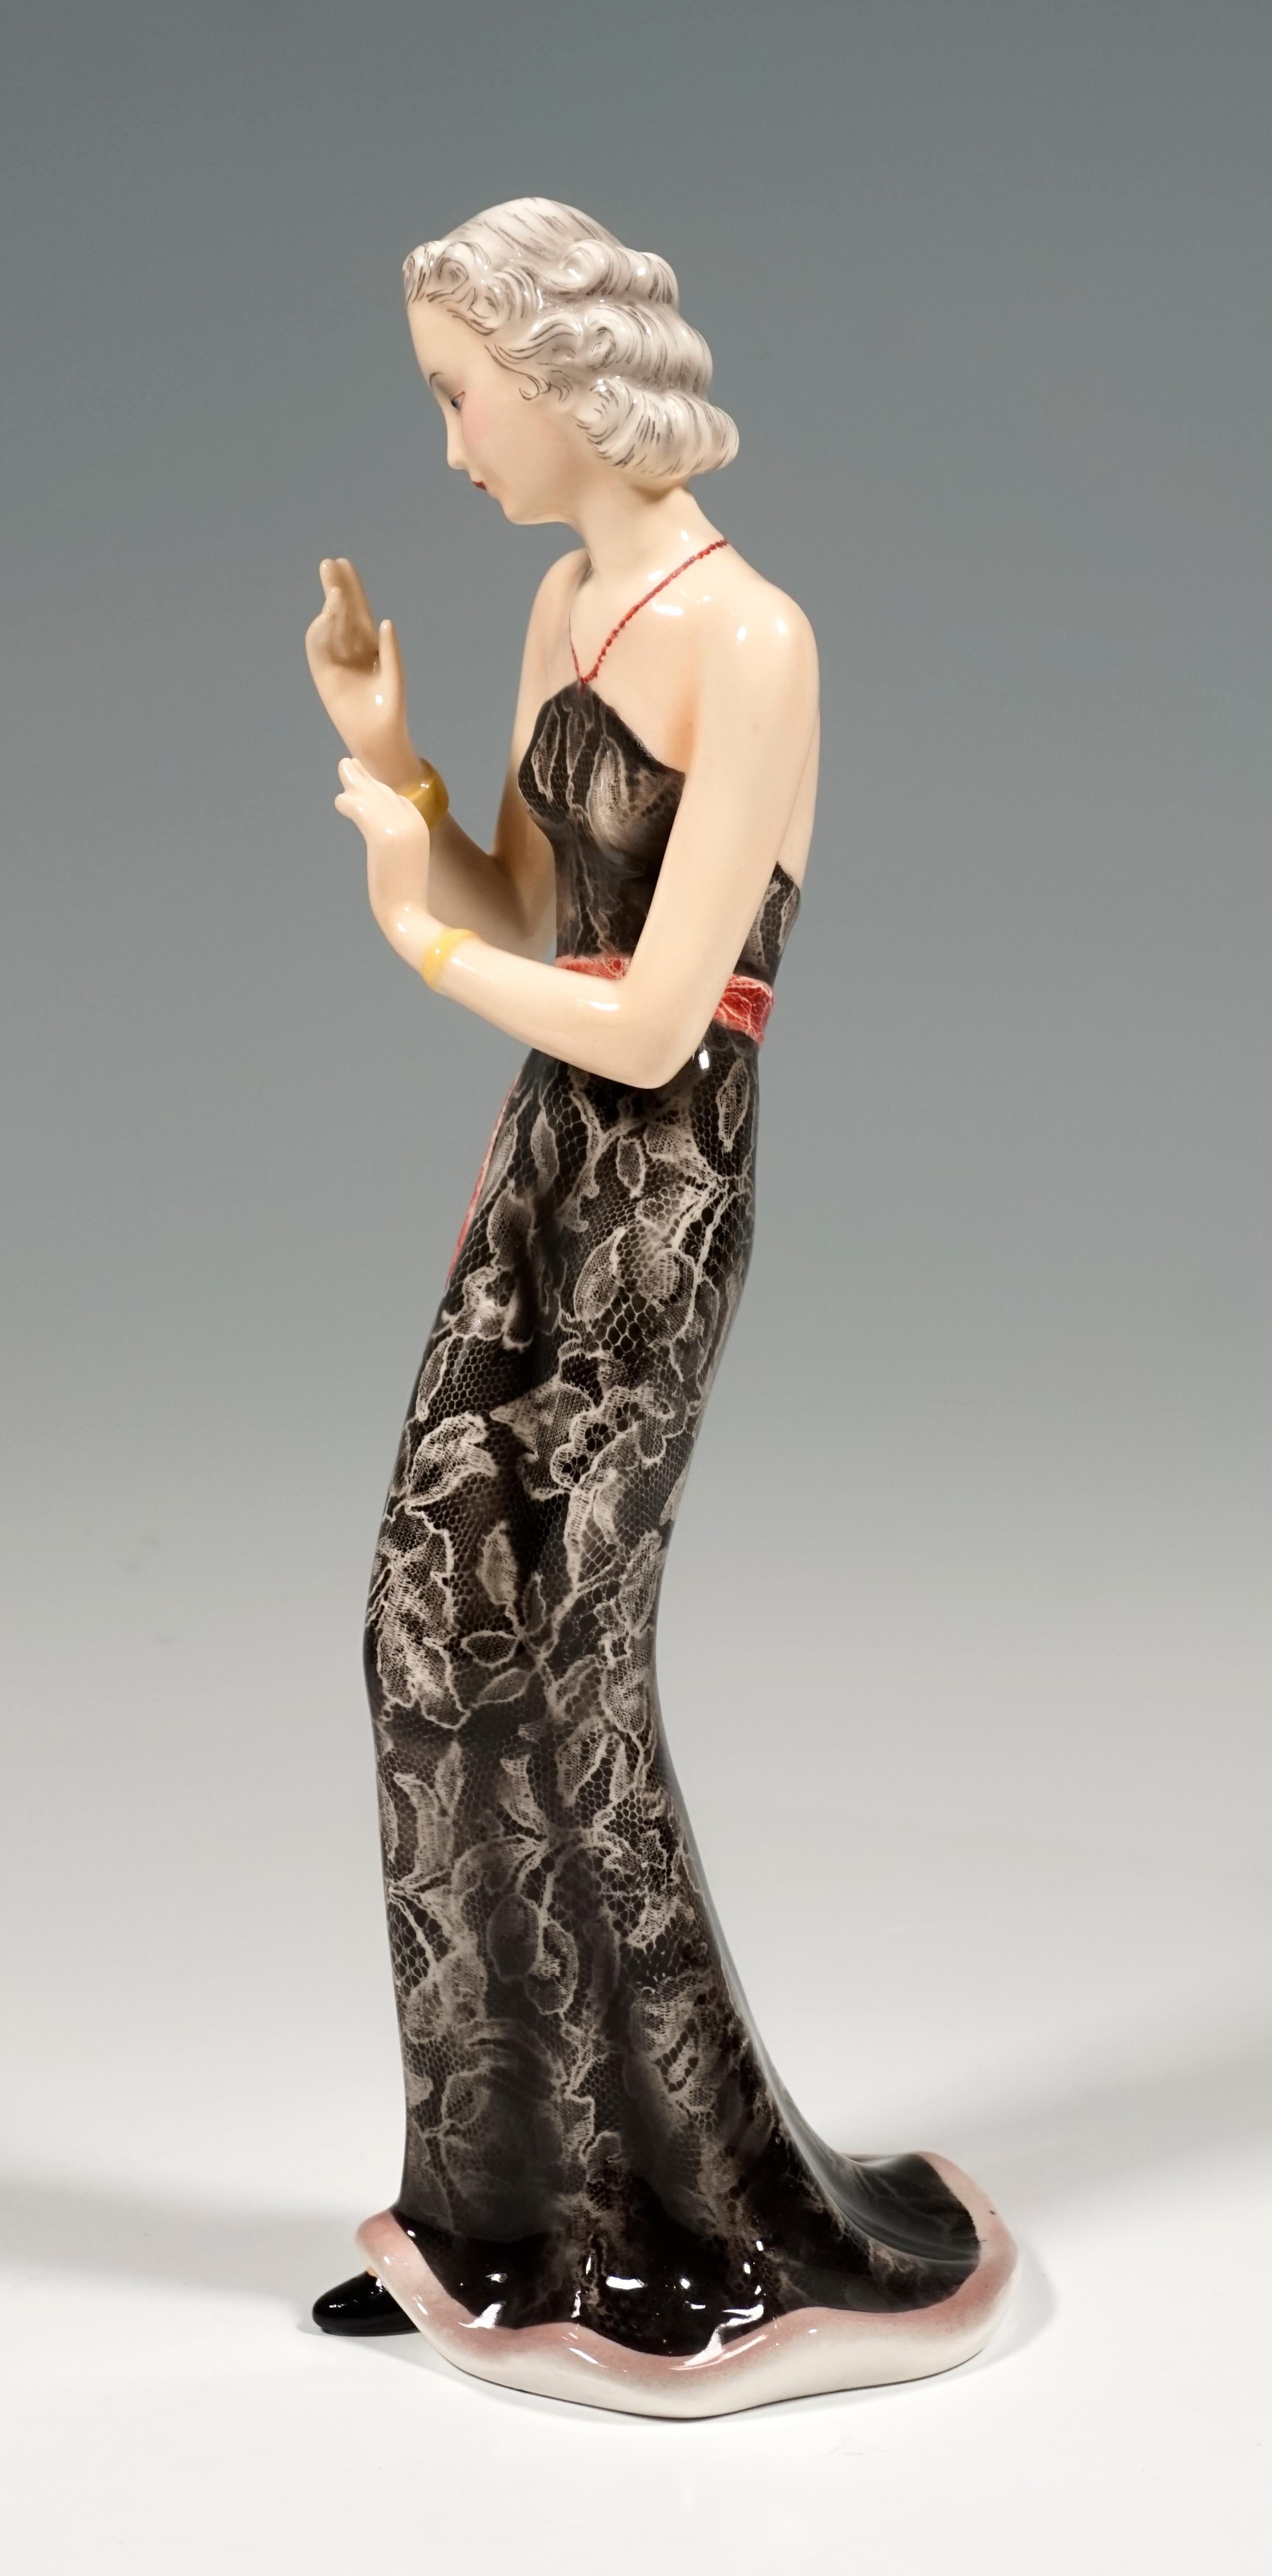 Depiction of an elegant lady with artfully pinned up hair in a long, tight, strapless lace dress in black low cut at the back, with a red, long belt strap, holding her arms in front of her in an elegant gesture. Her pointed black shoe can be seen at